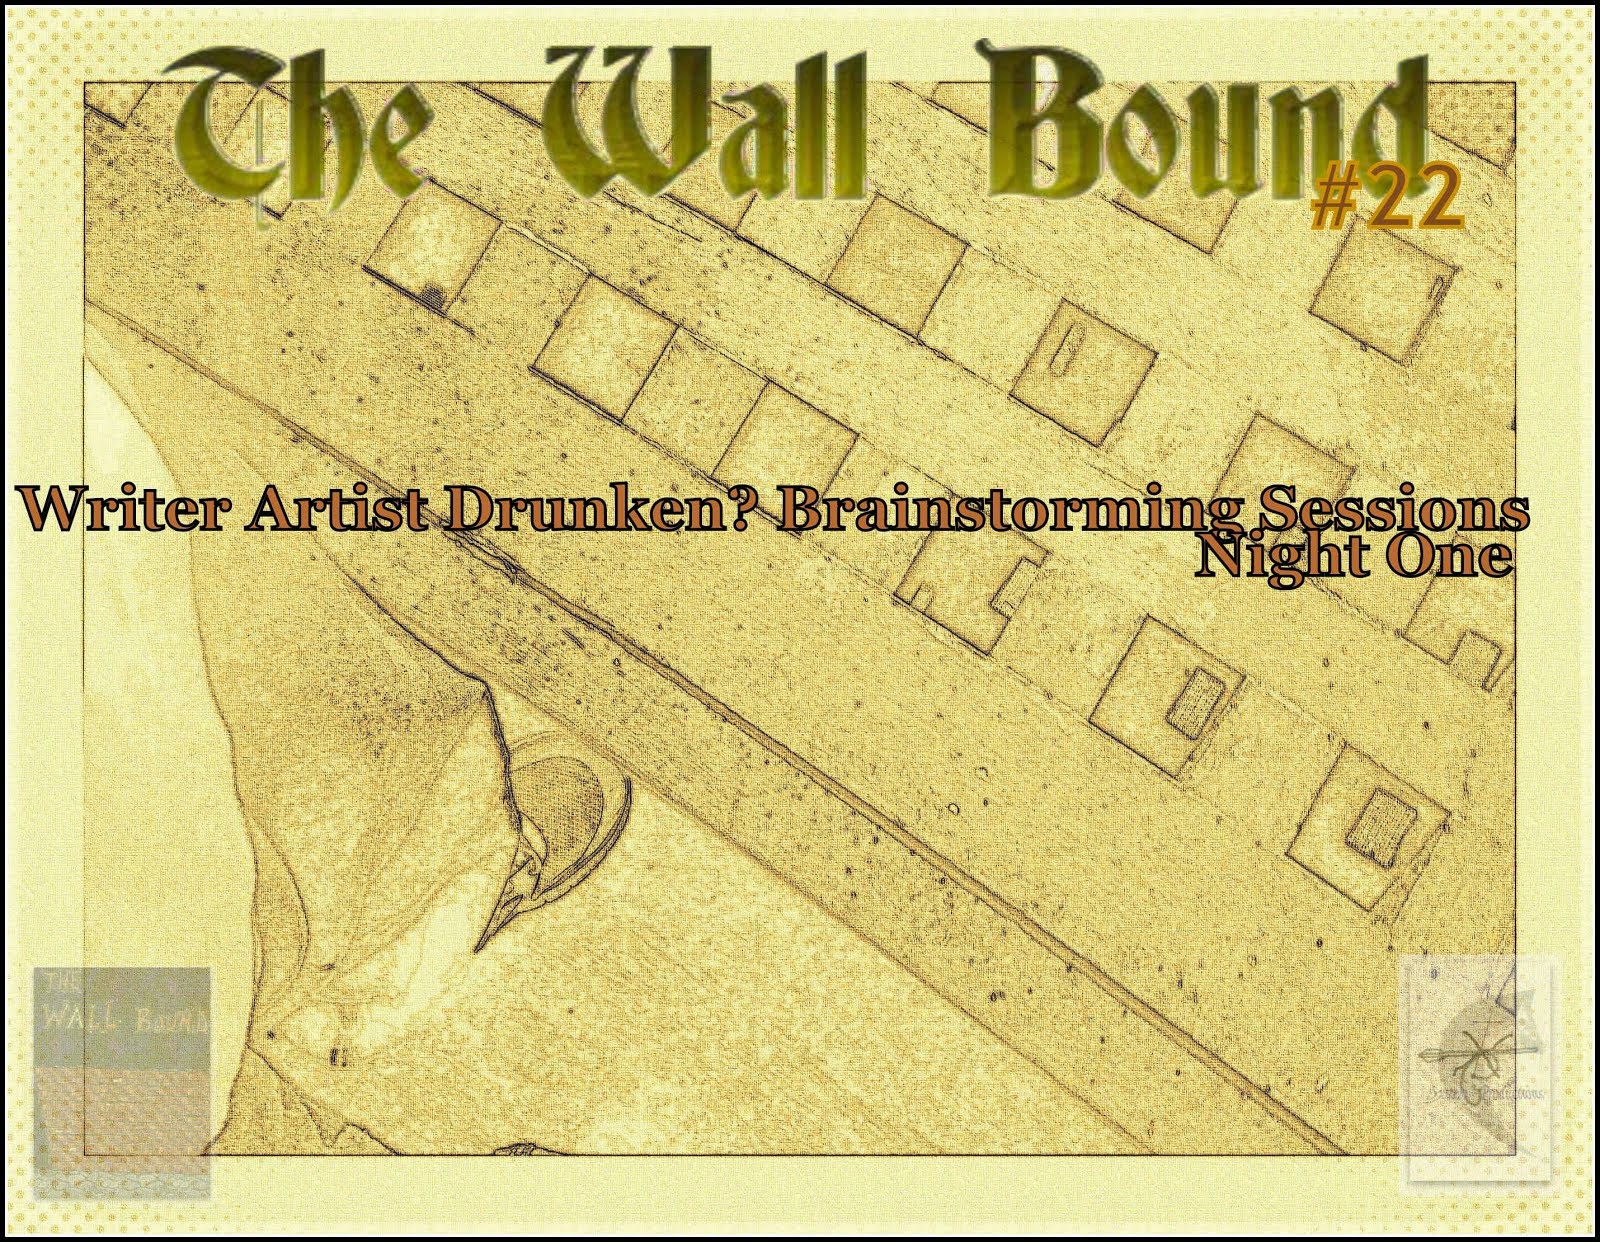 The Wall Bound #22 Writer Artist Drunken Brainstorming Sessions Night One